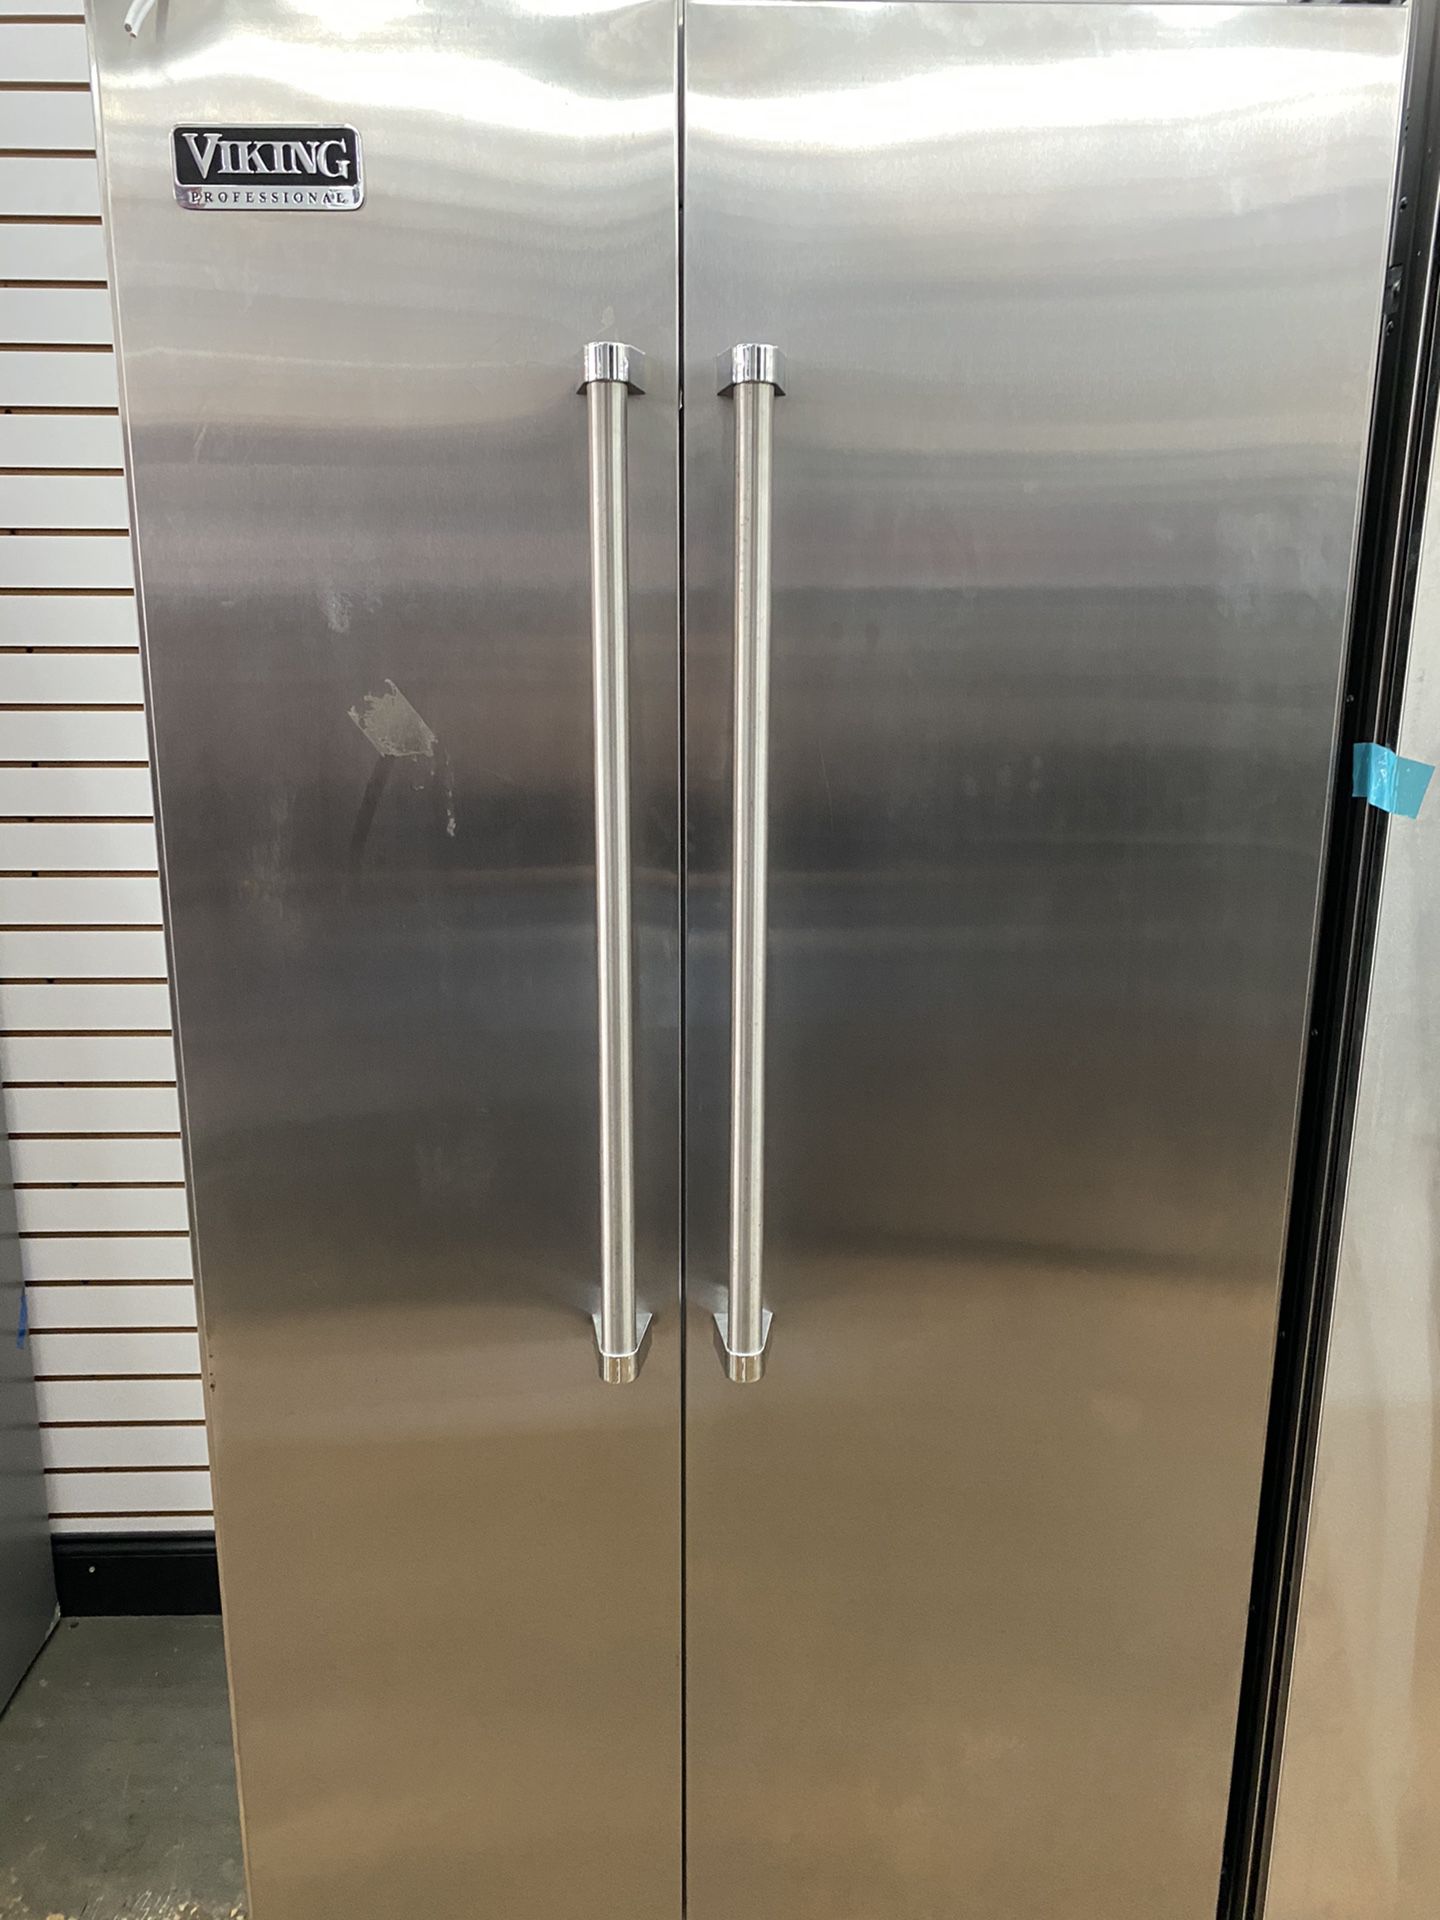 Refrigerator, Viking, kek appliances, kissimmee, $39 down payment, ask for enas